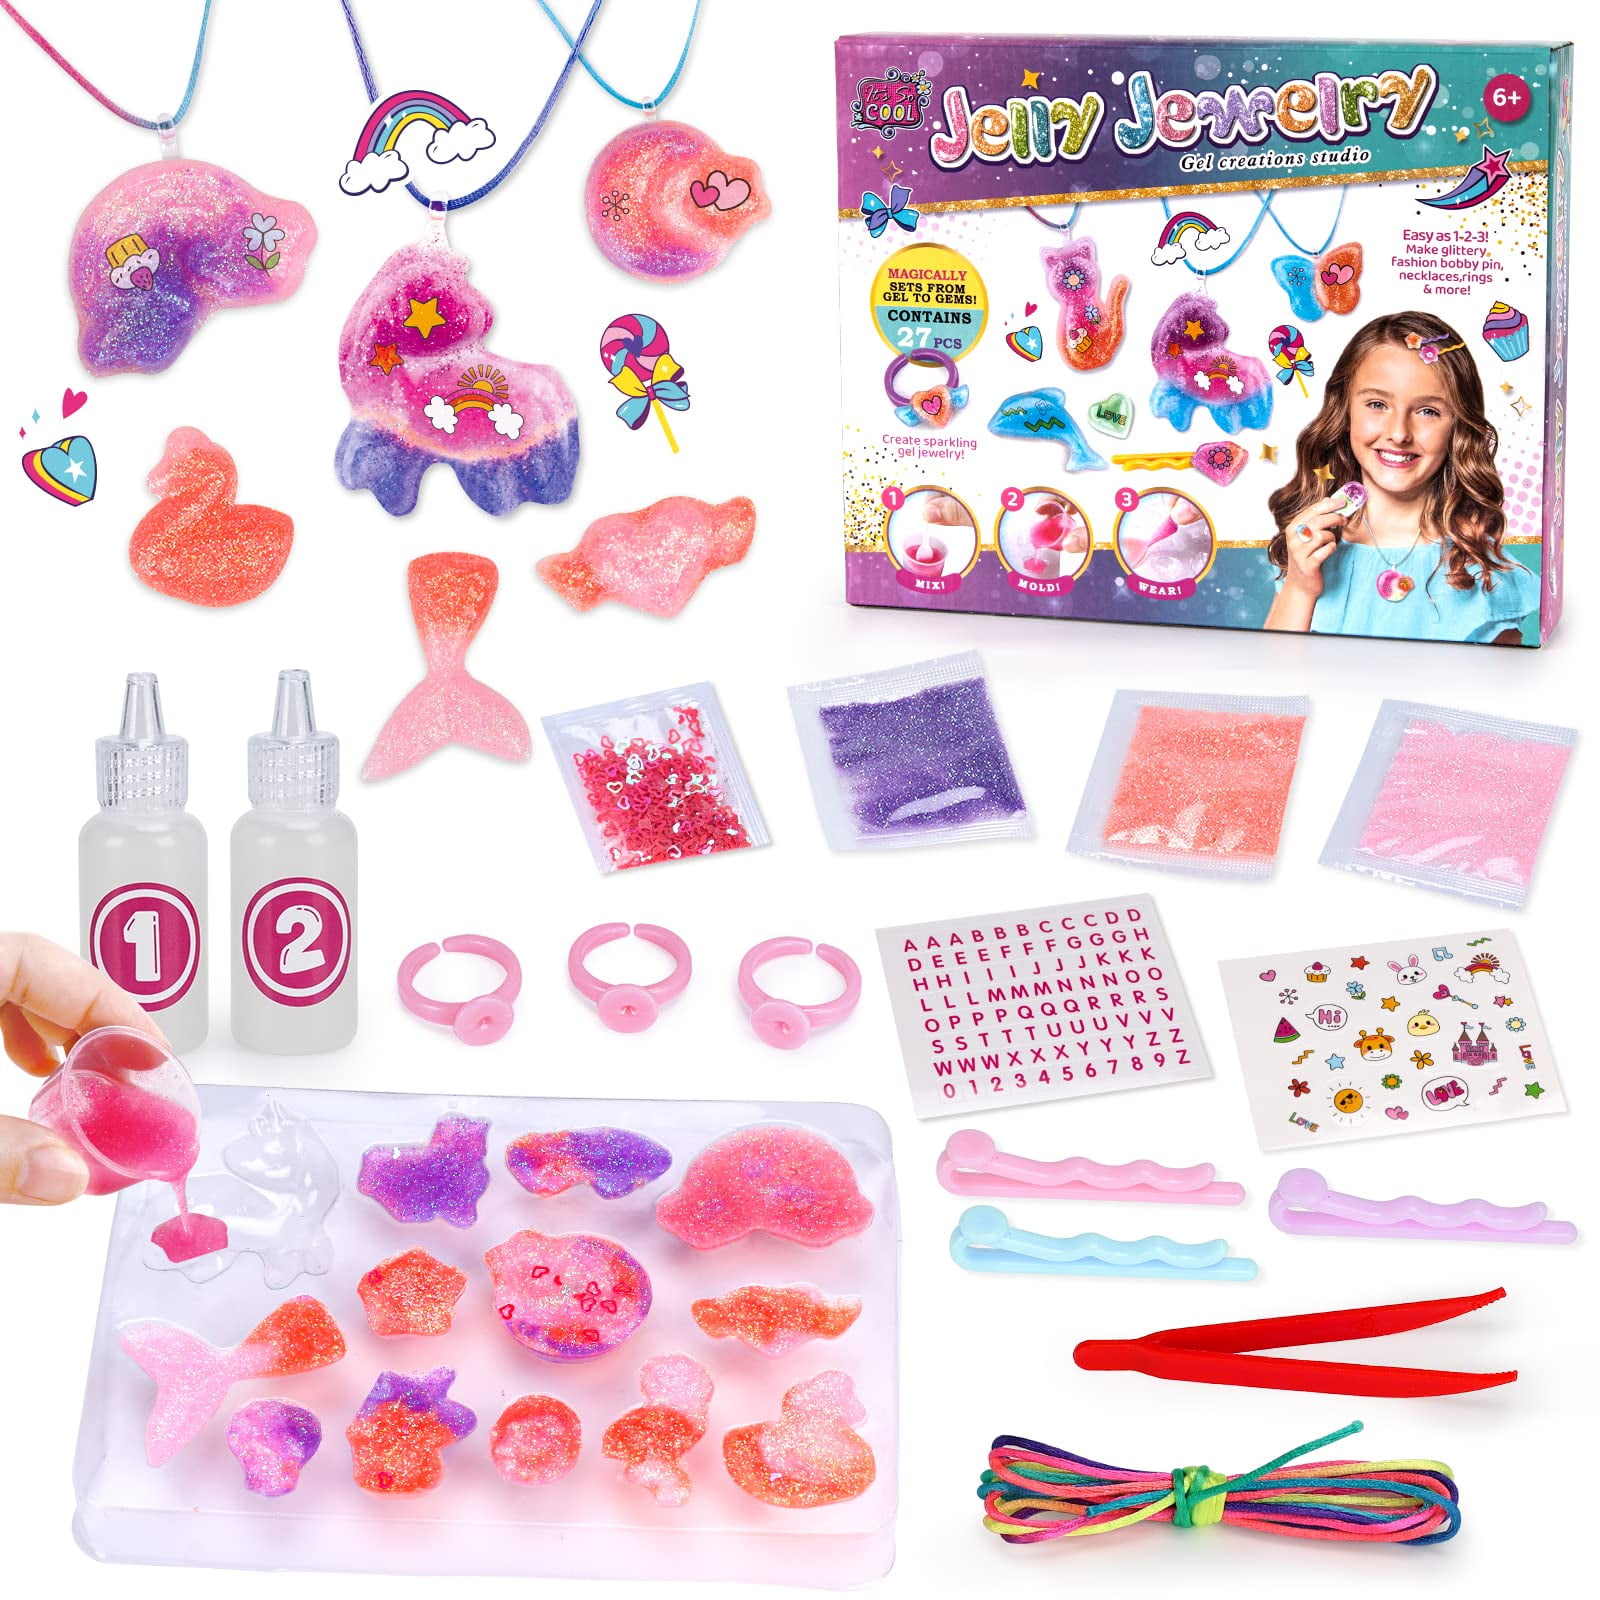 COLOUR YOUR OWN SPARKLING JEWELLERY GIRLS GIFT FUN ART TOY BIRTHDAY PARTY GIFT 